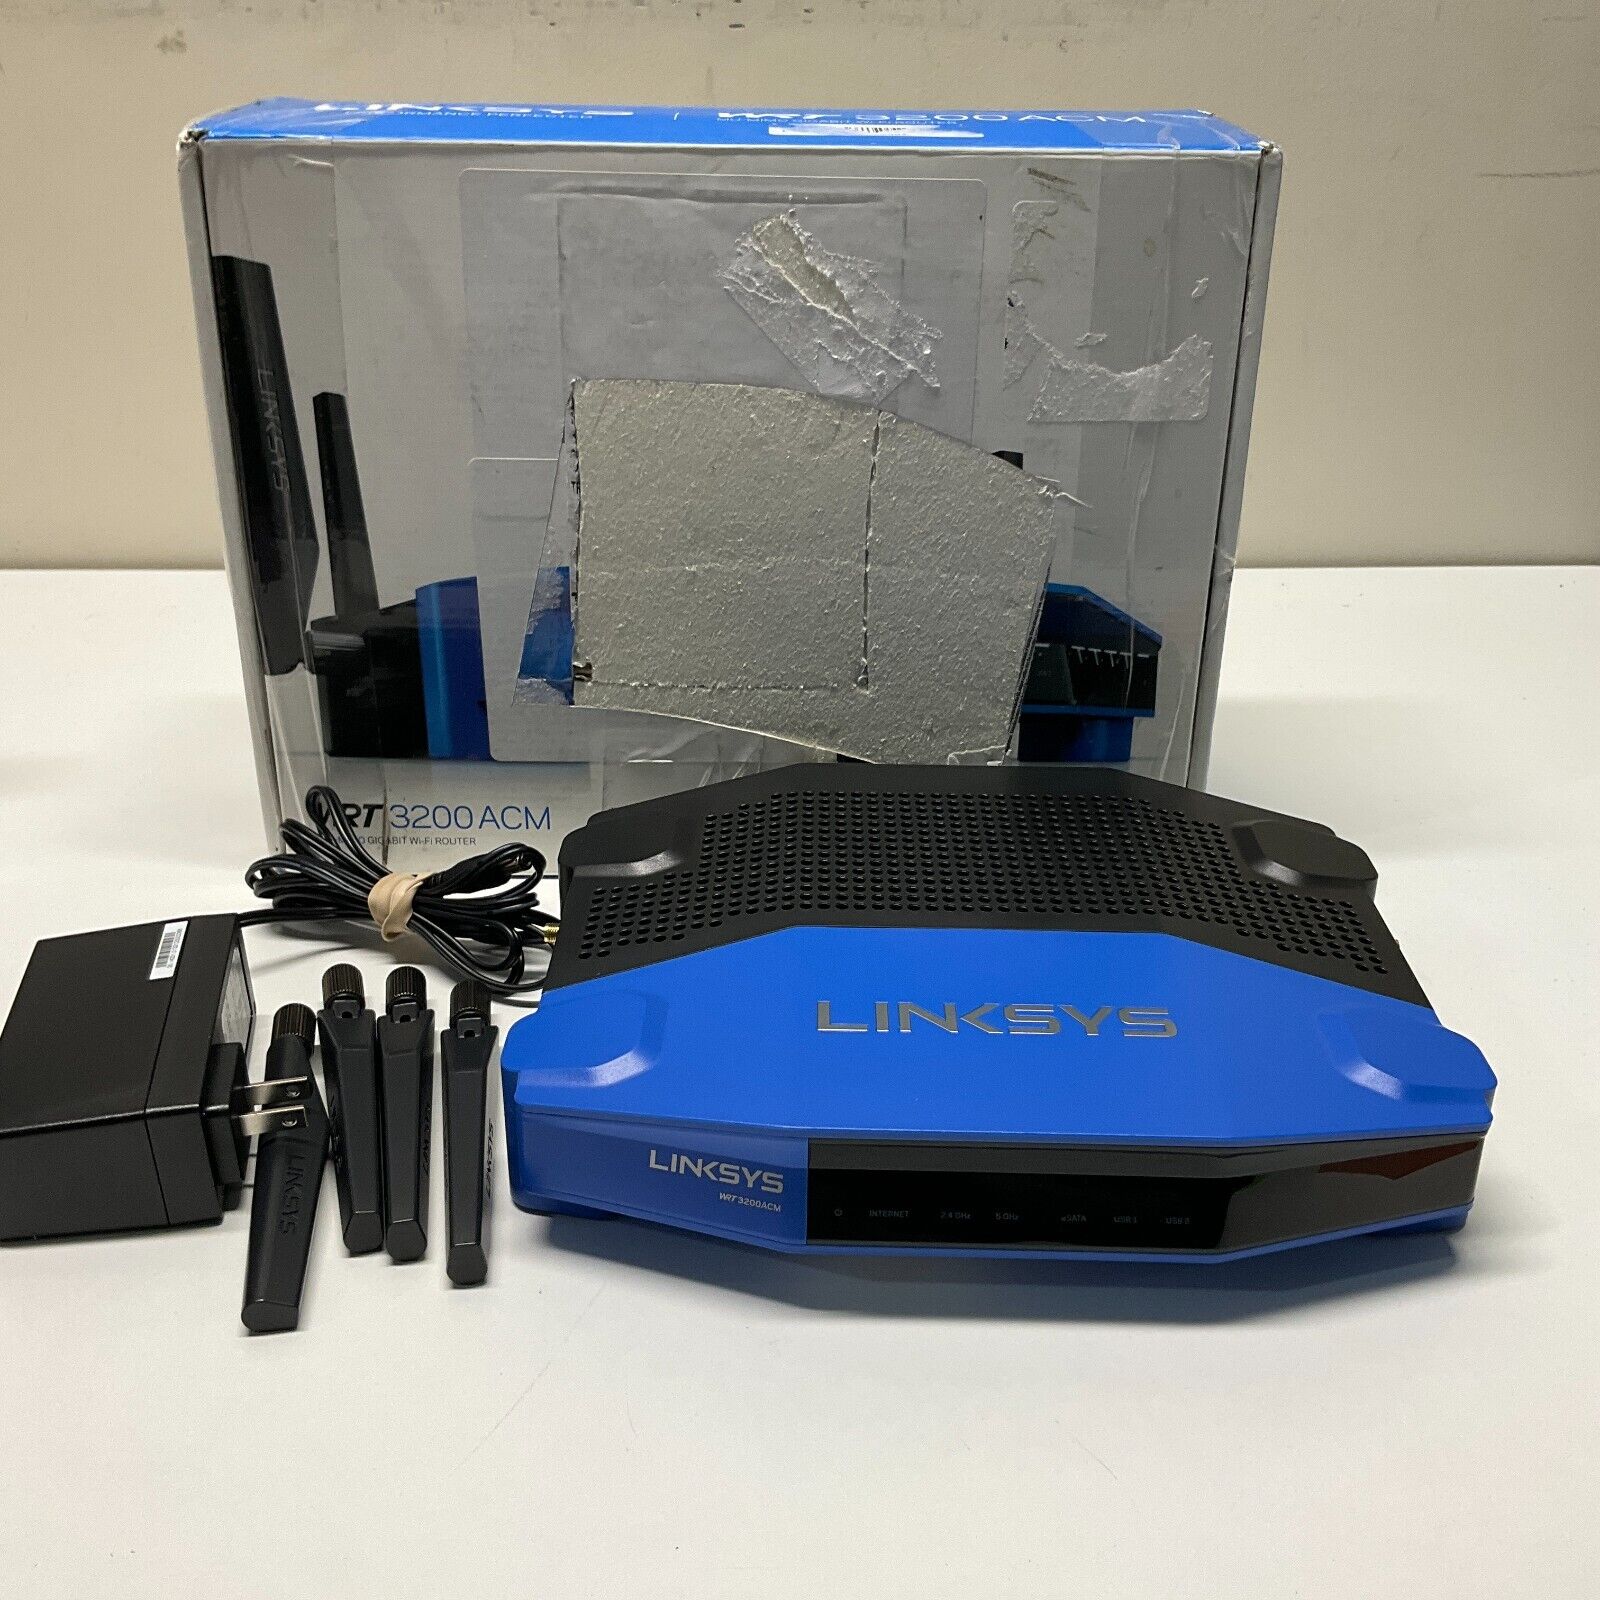 Linksys WRT3200ACM AC3200 Dual-Band Wi-Fi Router in Original Box Tested